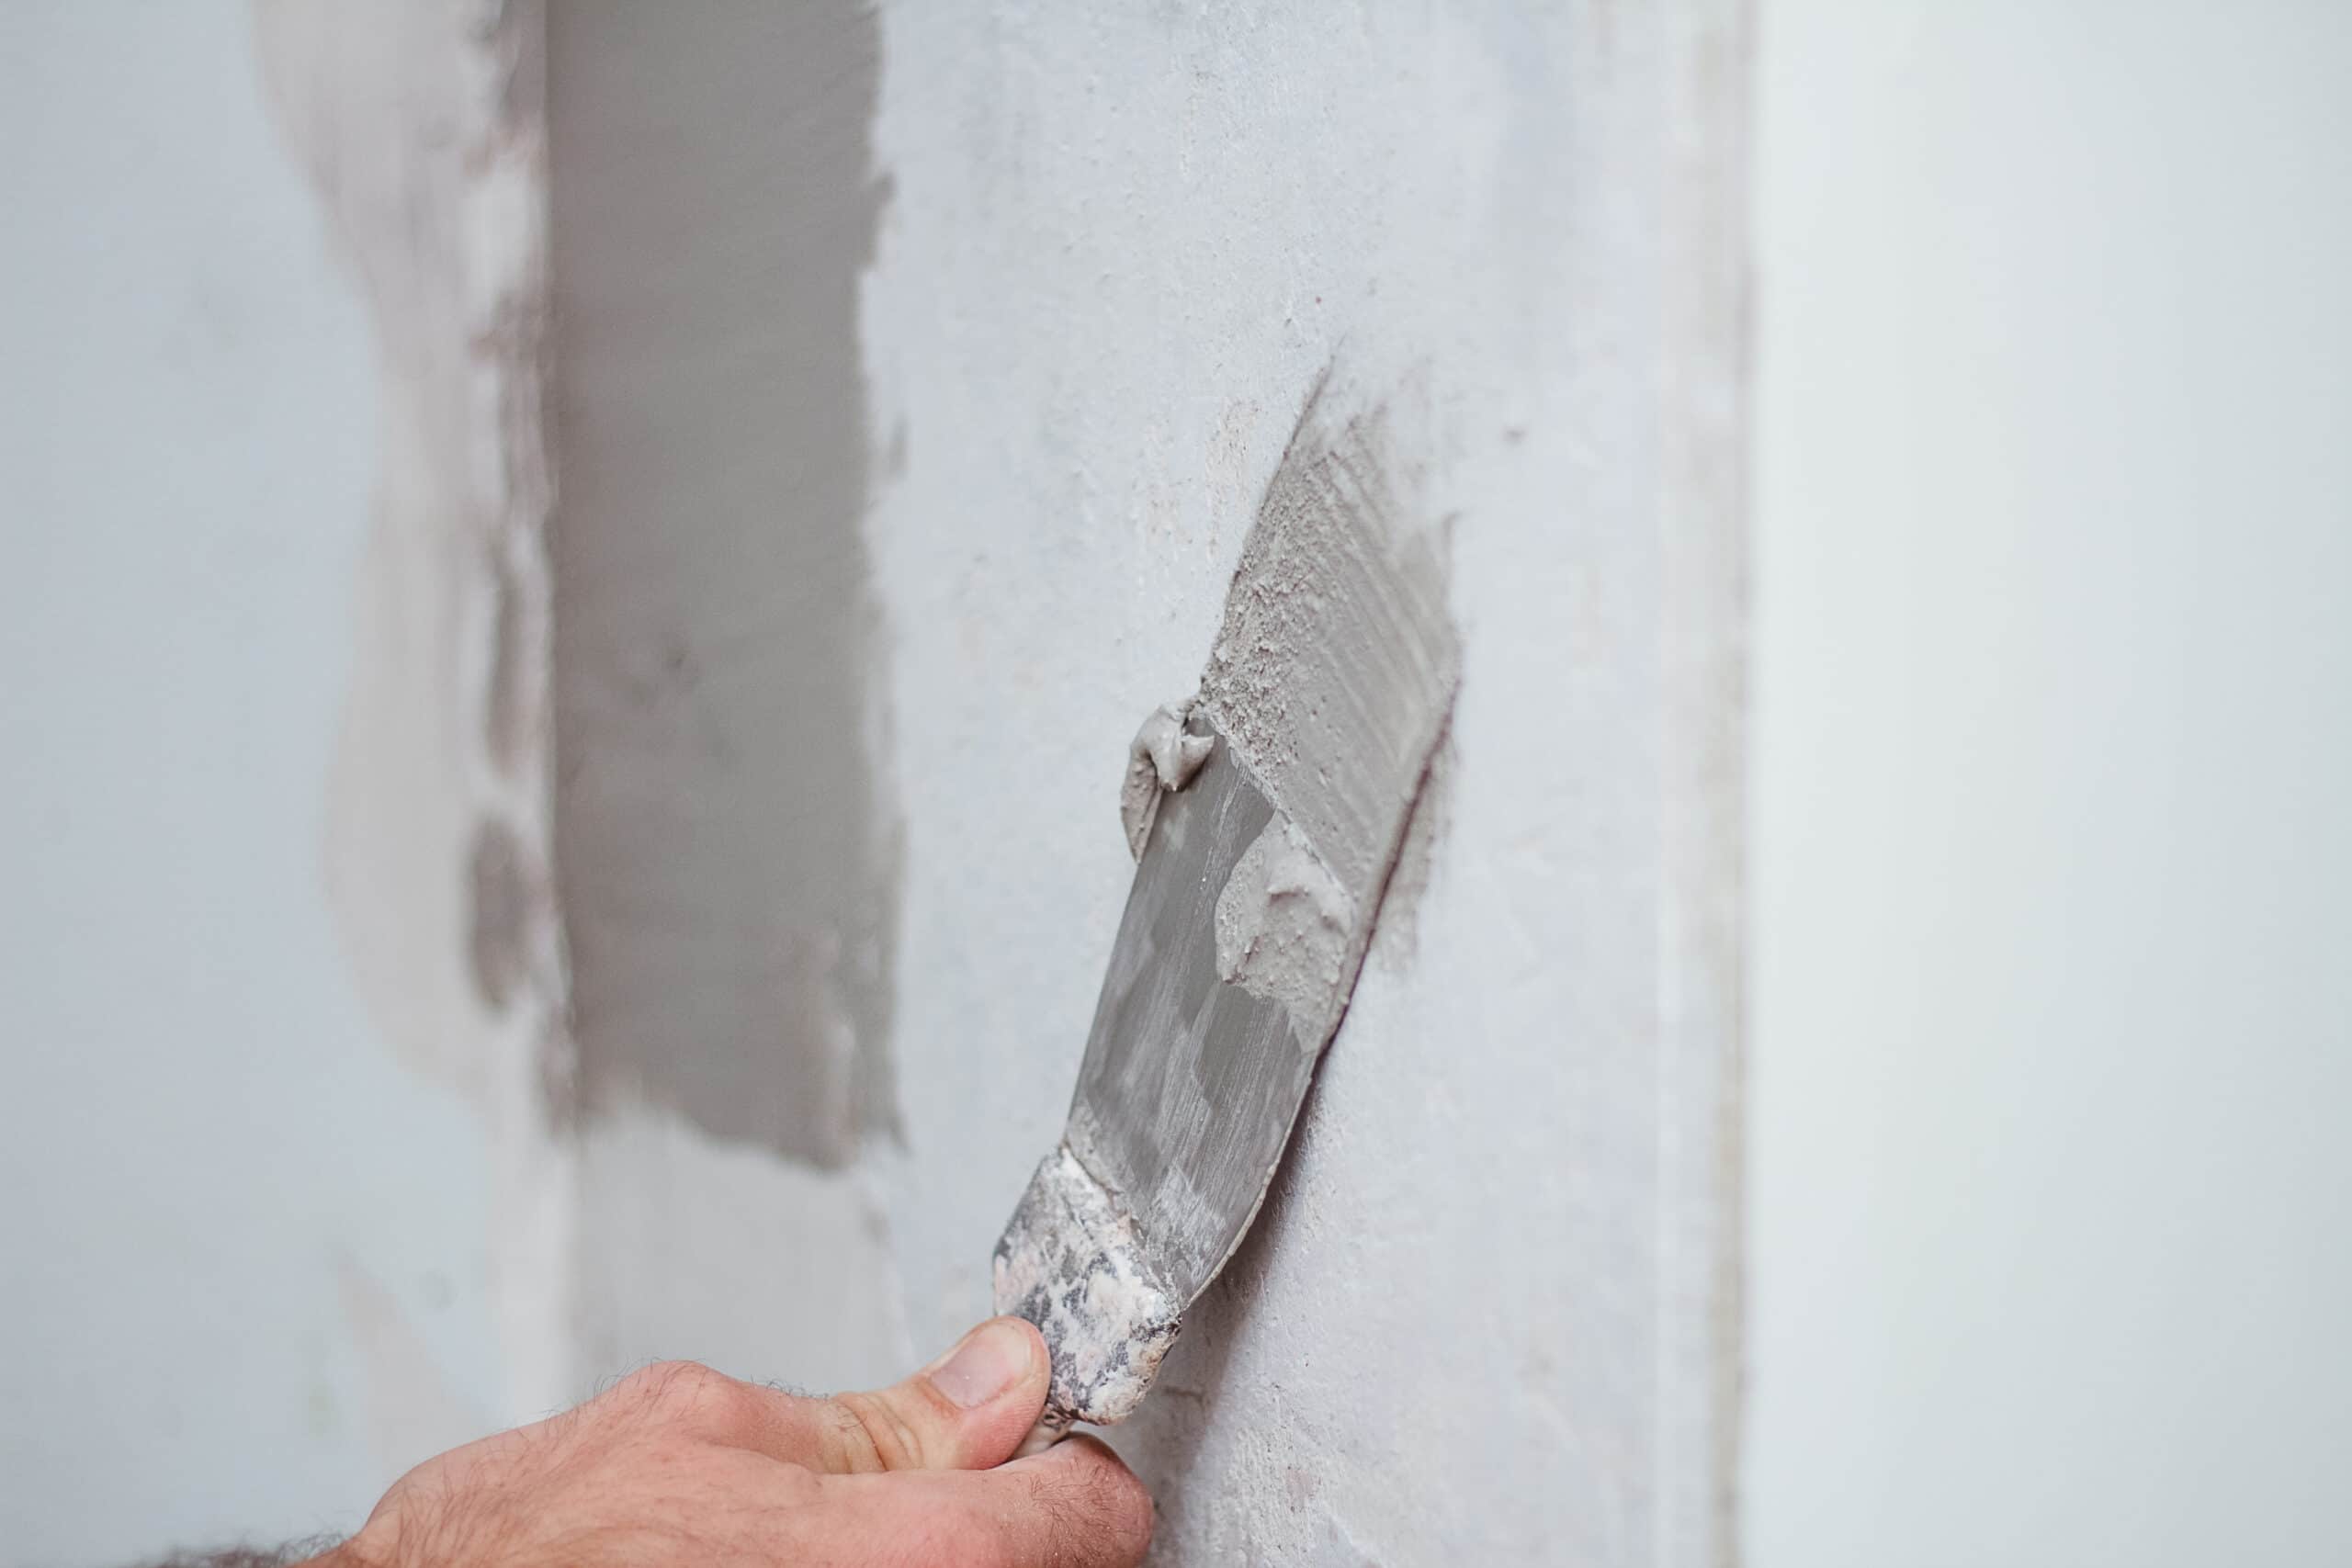 A man's hand using a trowel to apply skim coating to a wall for waterproofing purposes.